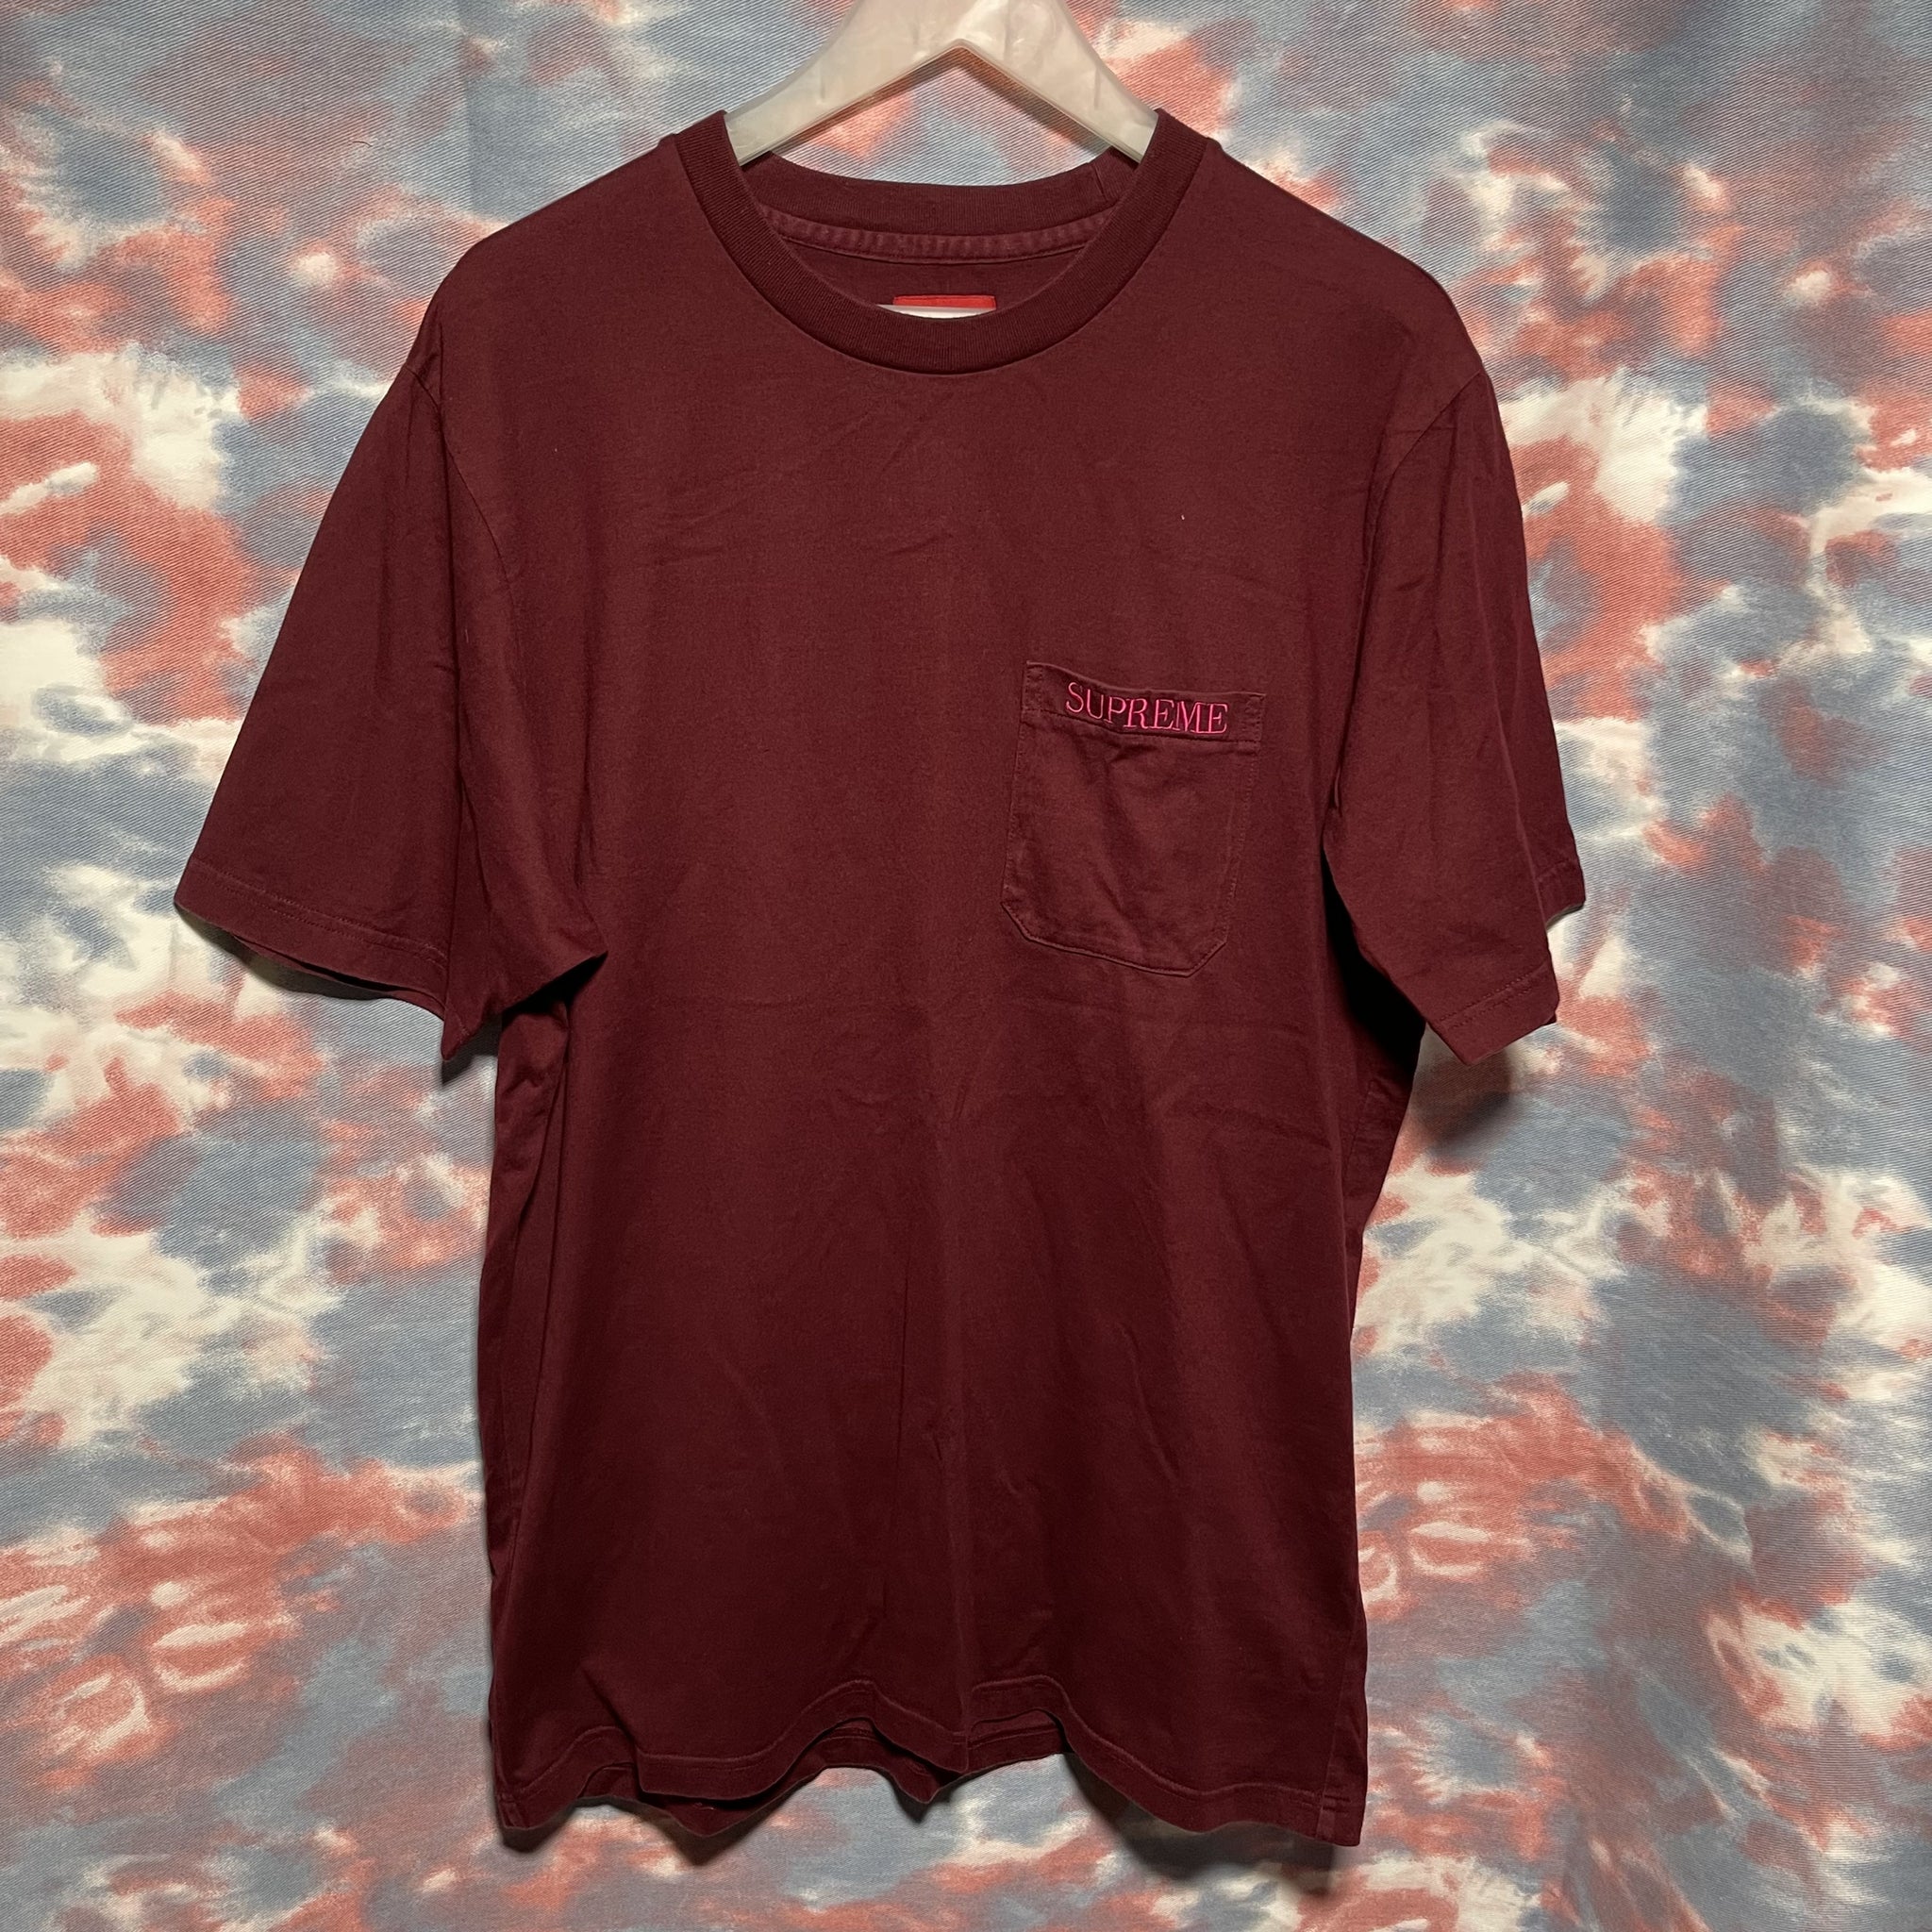 Supreme Pocket Tee wine red embroiderated logo size L 酒紅色繡字口袋tee